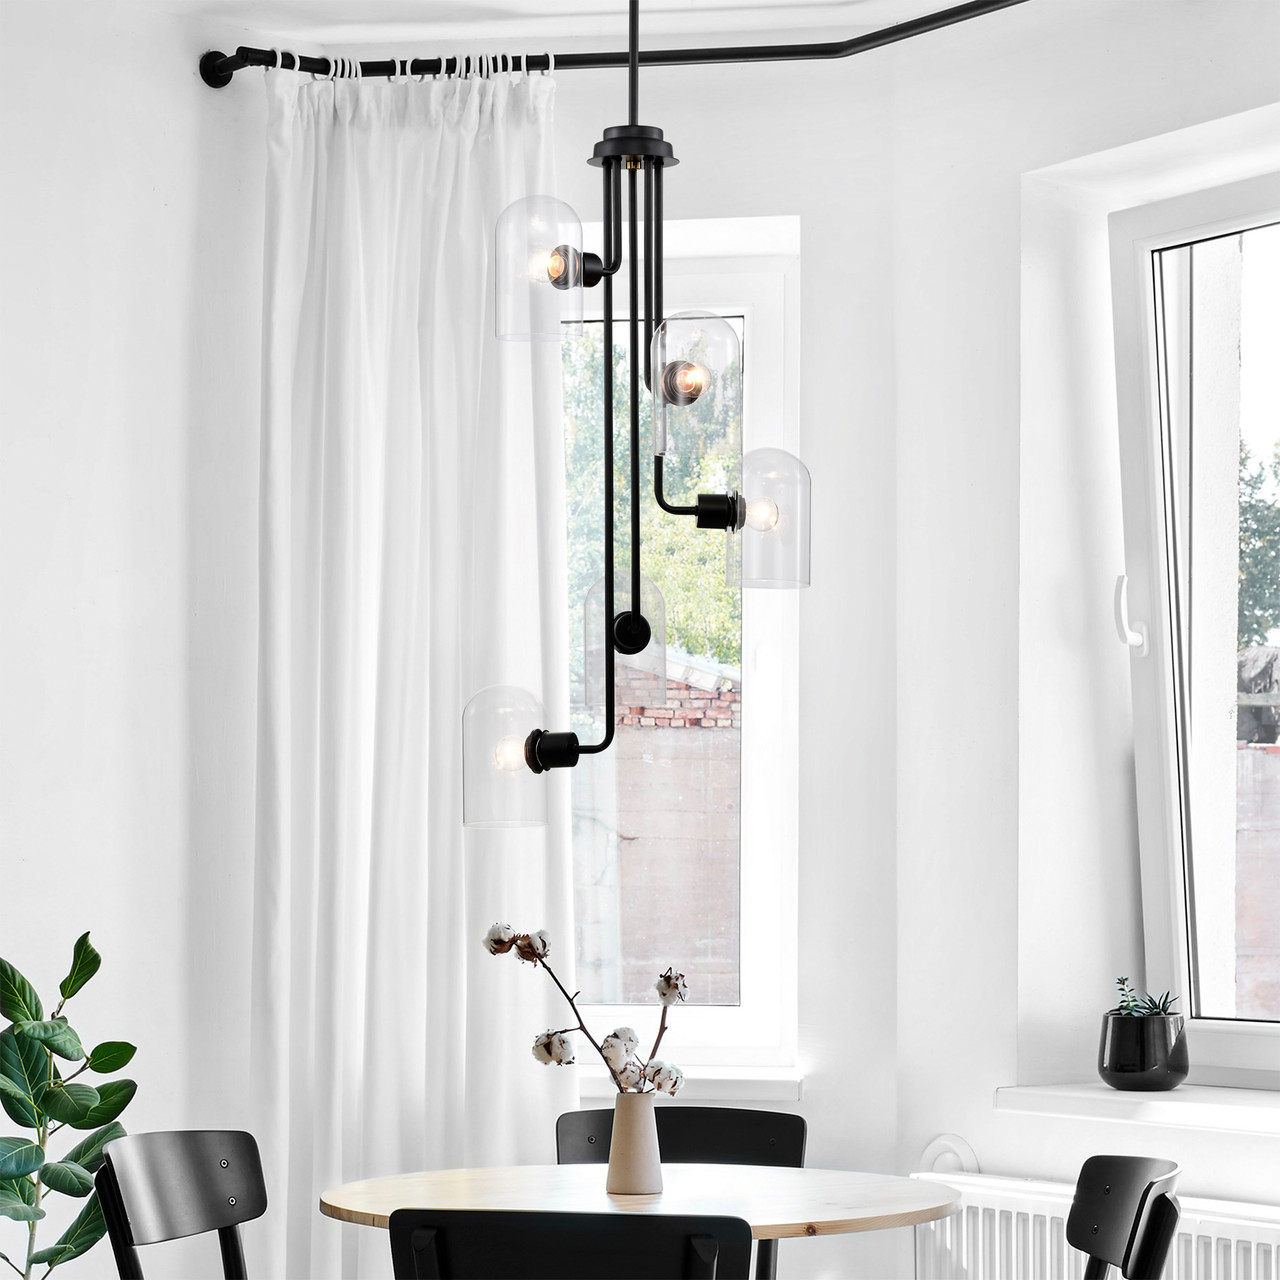 WAREHOUSE OF TIFFANY'S FD10047/5MB Alana 18.9 in. 5-Light Indoor Matte Black and Brass Finish Chandelier with Light Kit